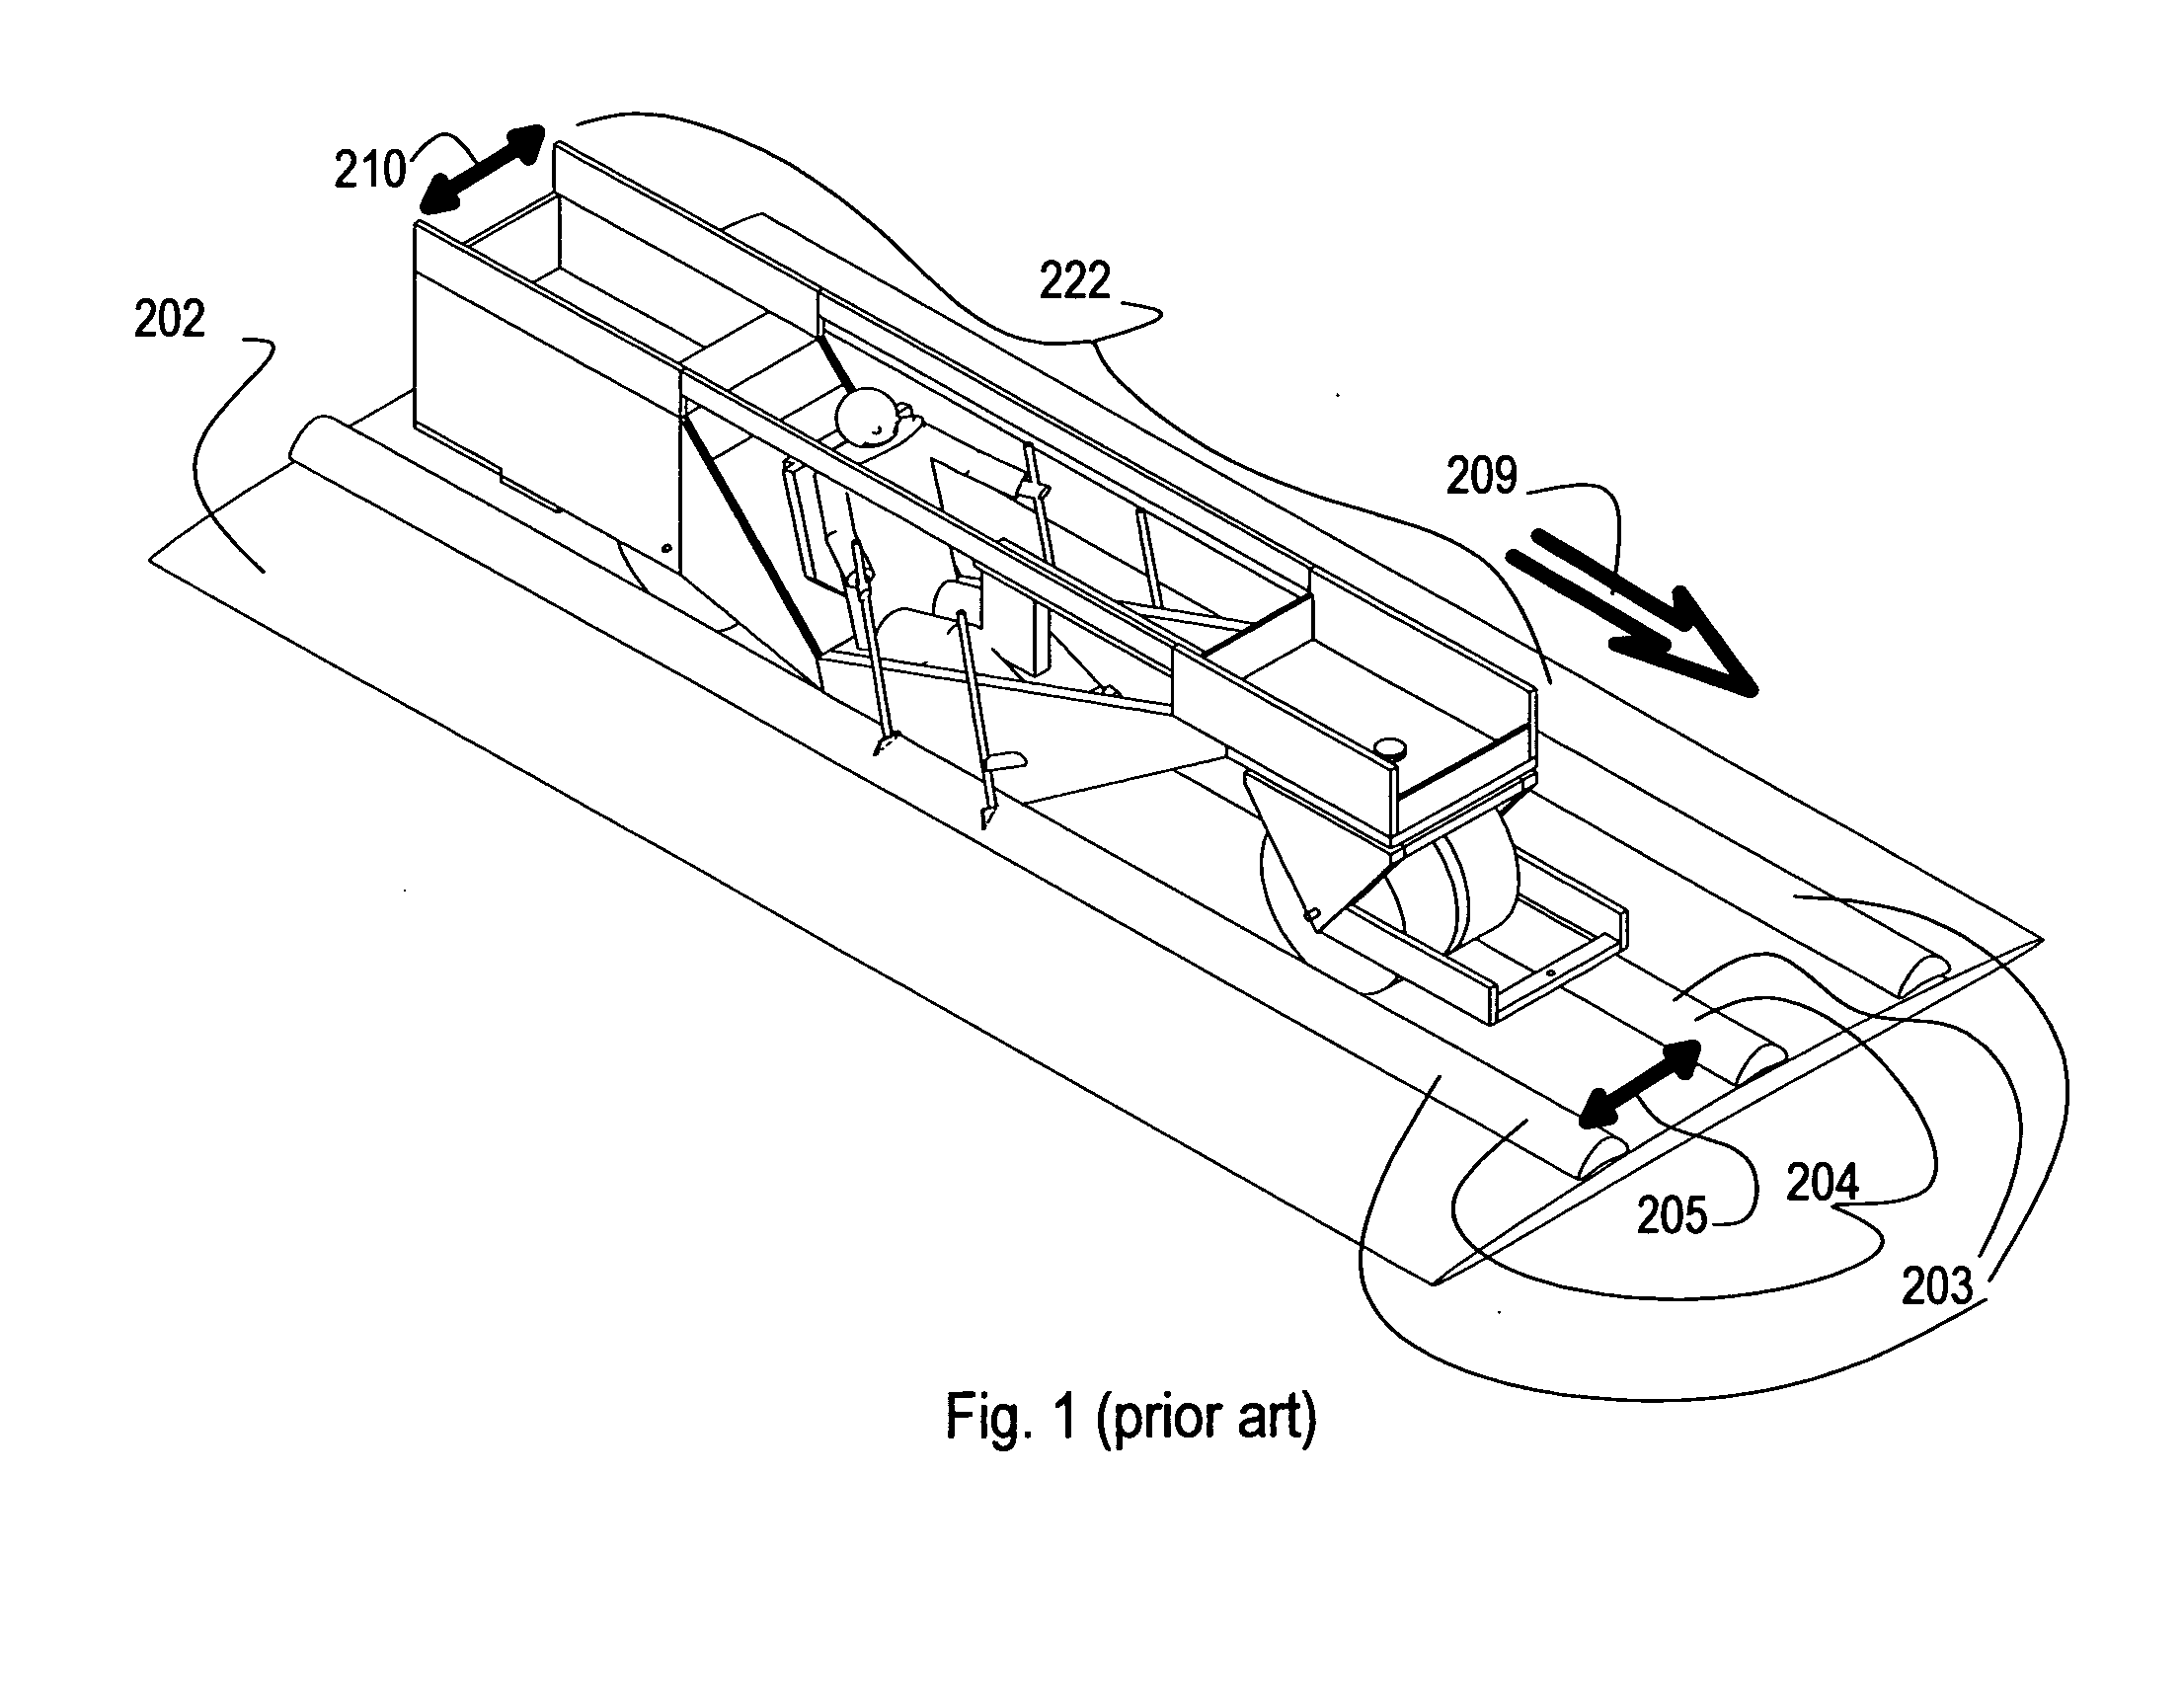 Field work vehicle with seat apparatus